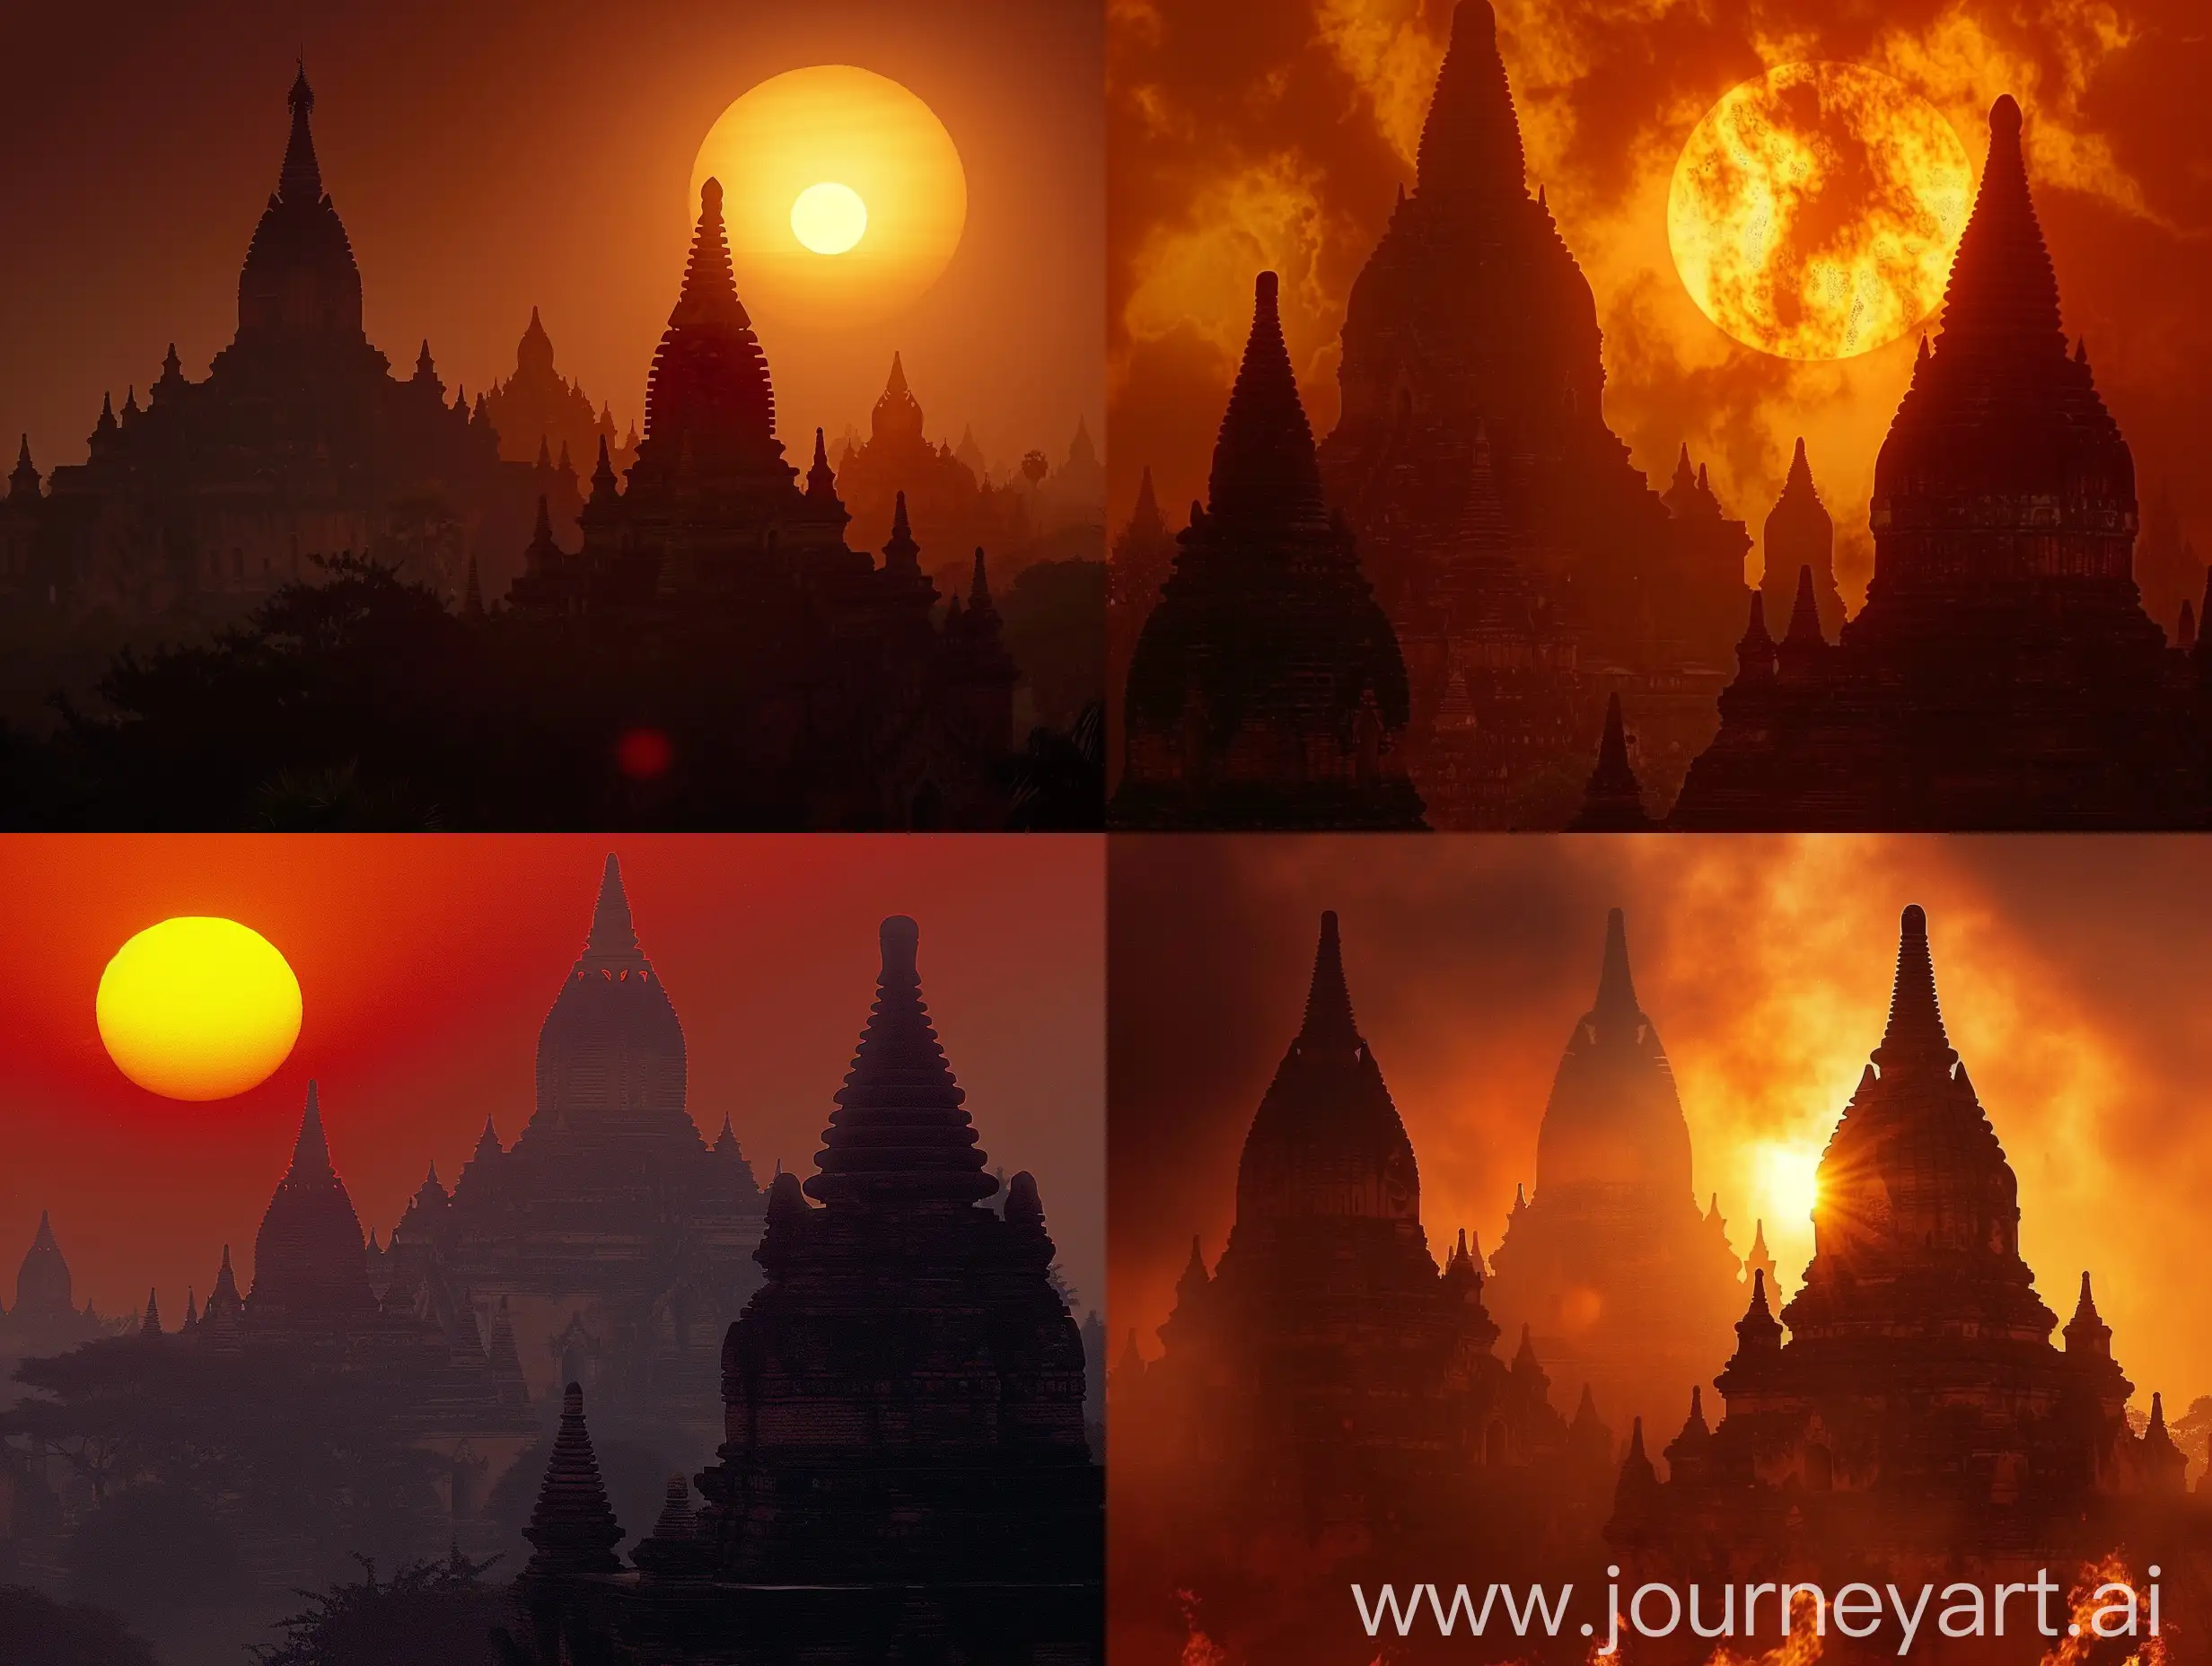 A mesmerizing image of the temples of Bagan silhouetted against the fiery hues of the setting sun. The ancient structures stand as silent witnesses to the passage of time, their intricate carvings and architectural details a testament to the craftsmanship of their creators.